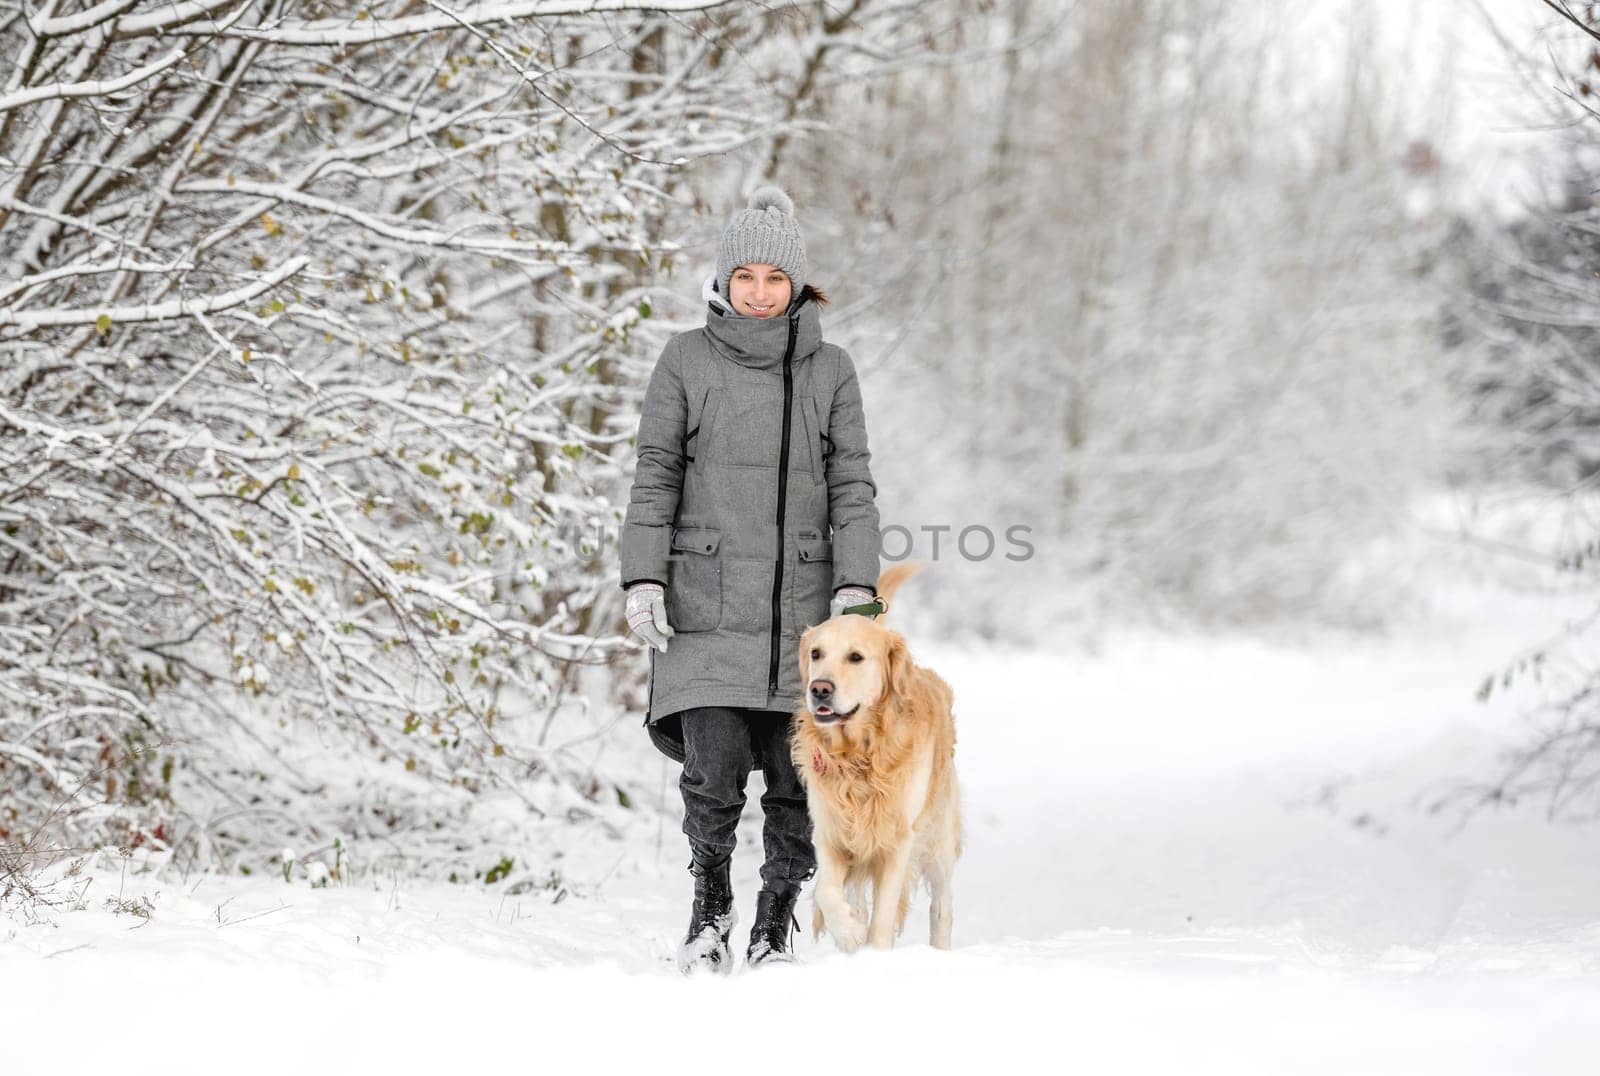 Teenage Girl With Golden Retriever In Winter Forest by tan4ikk1